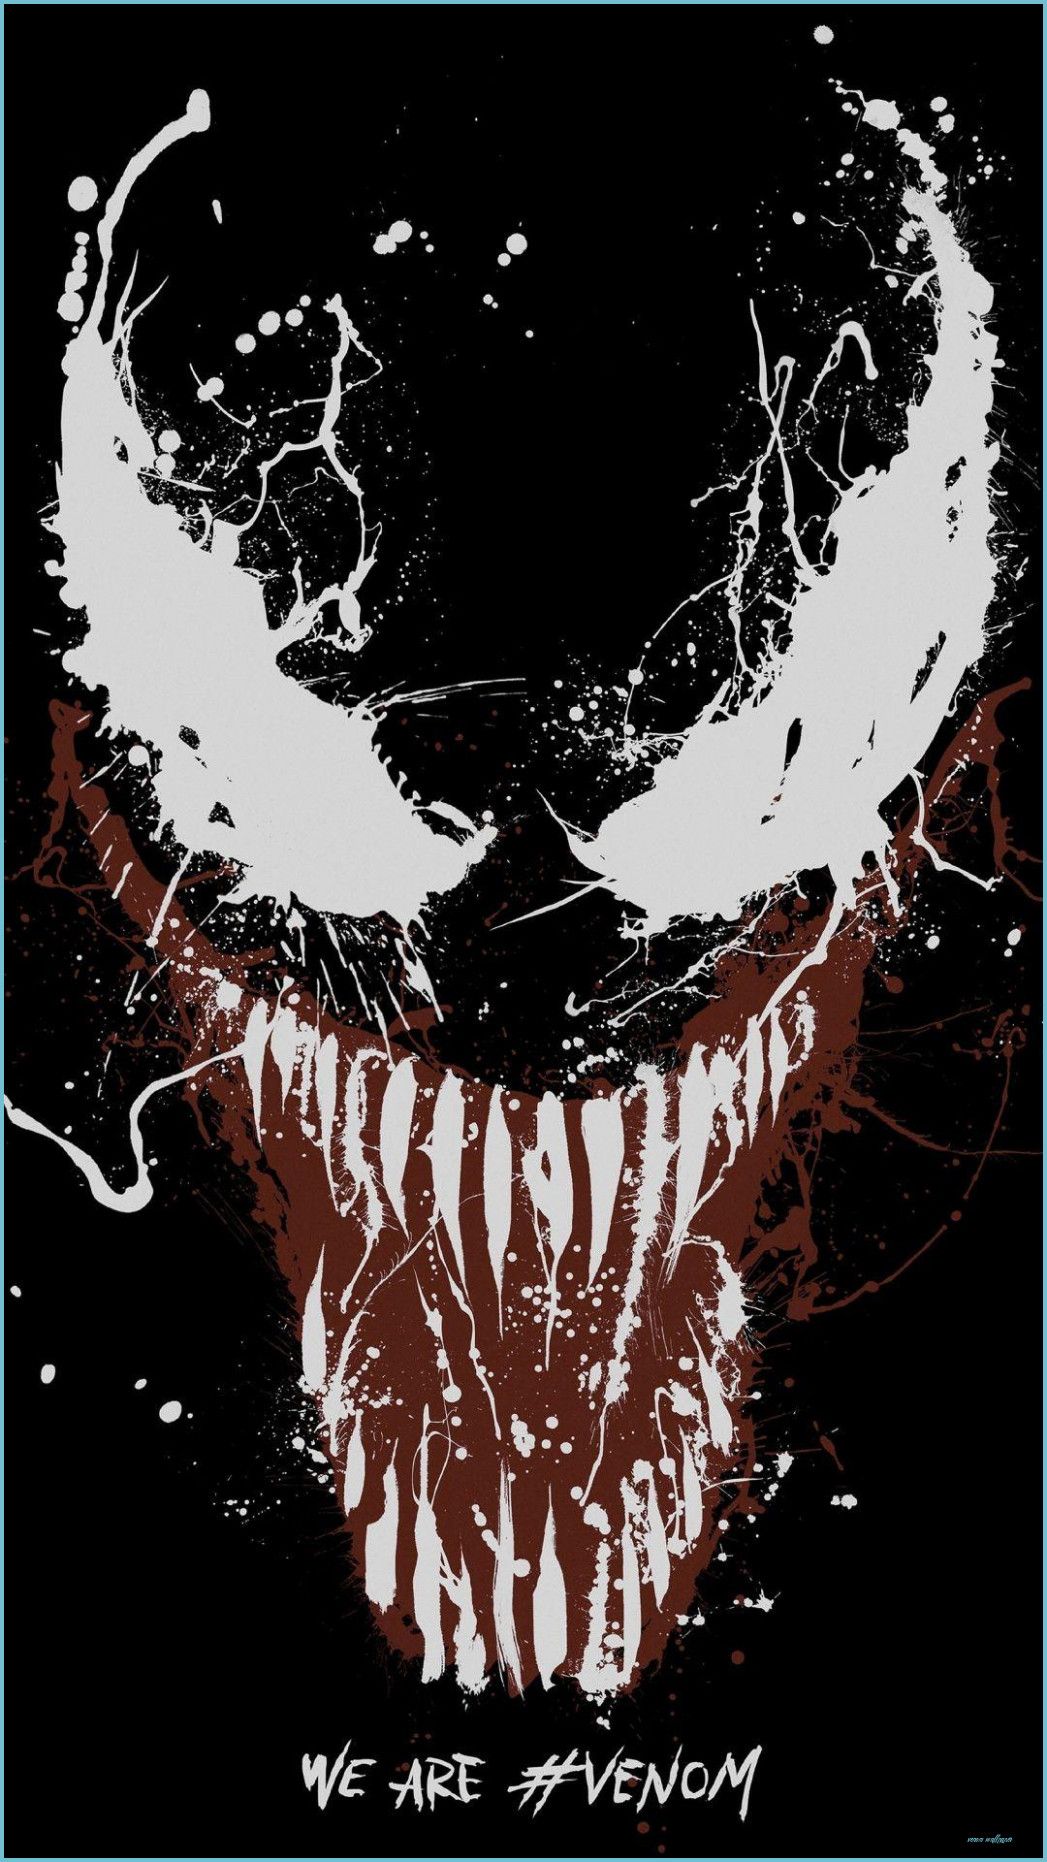 Why You Must Experience Venom Wallpaper At Least Once In